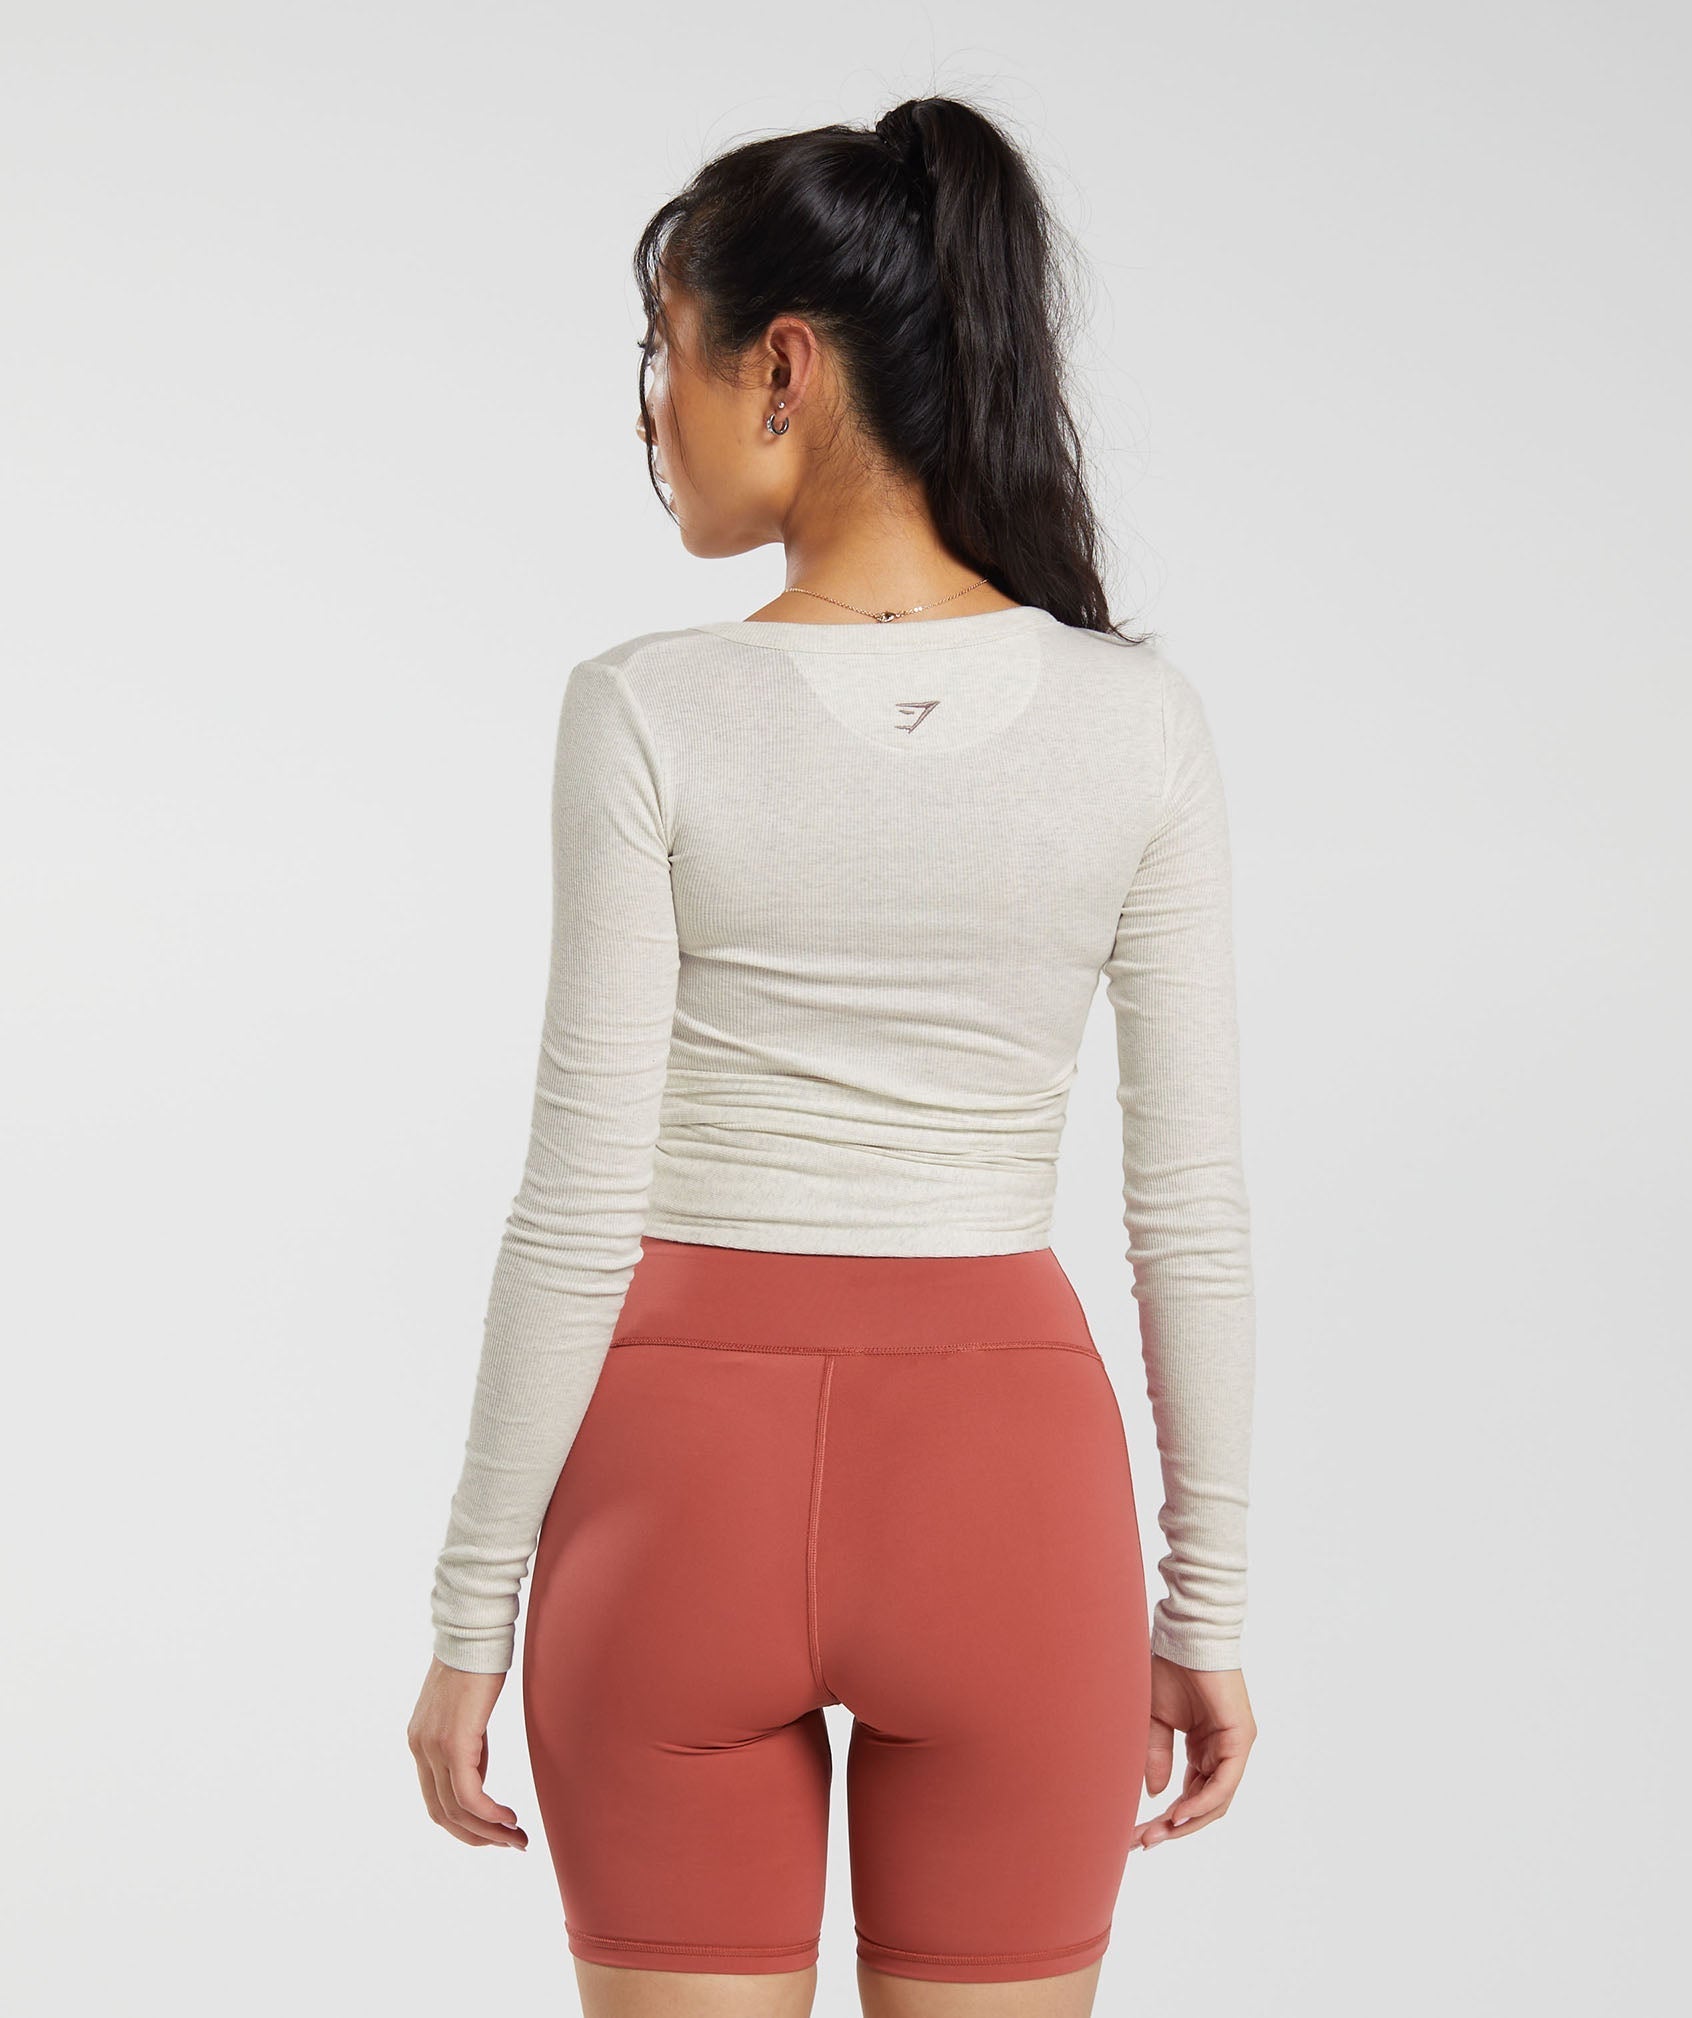 Elevate Wrap Long Sleeve Top in Frost White Marl - view 2